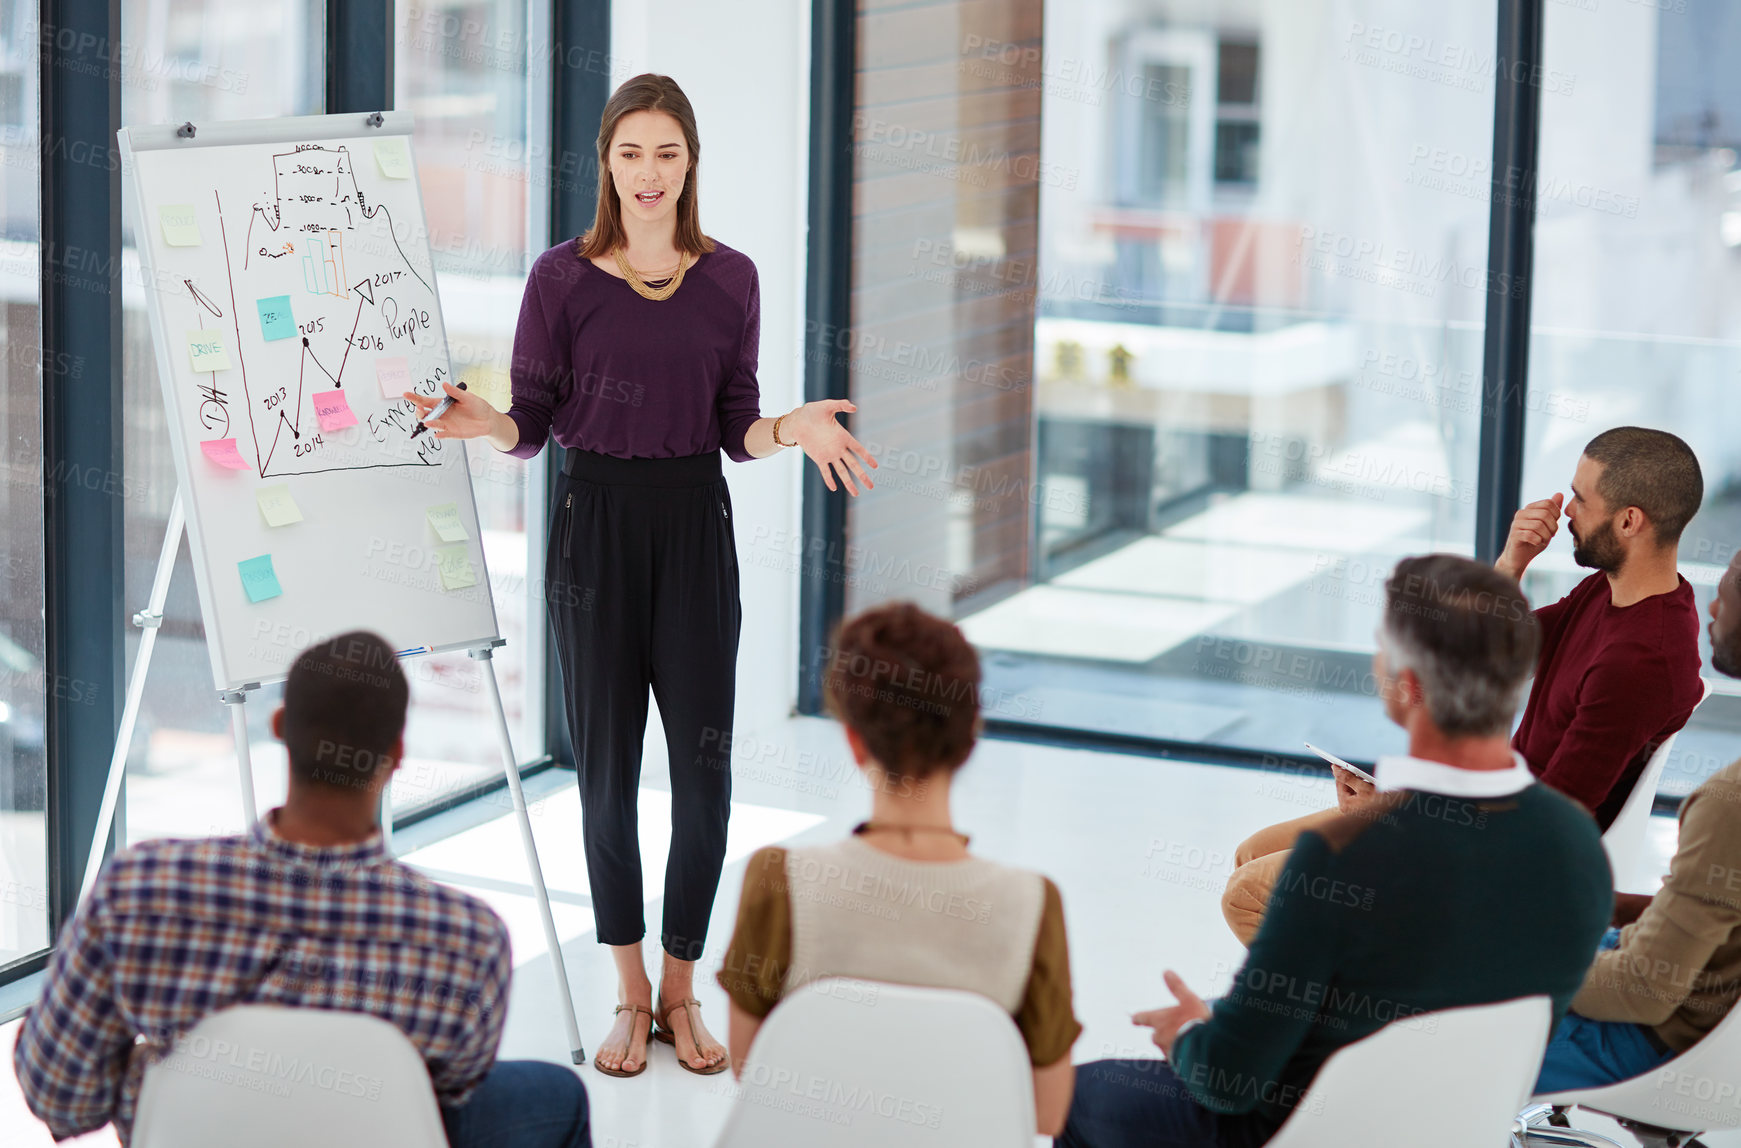 Buy stock photo Shot of a young businesswoman giving a presentation in the boardroom